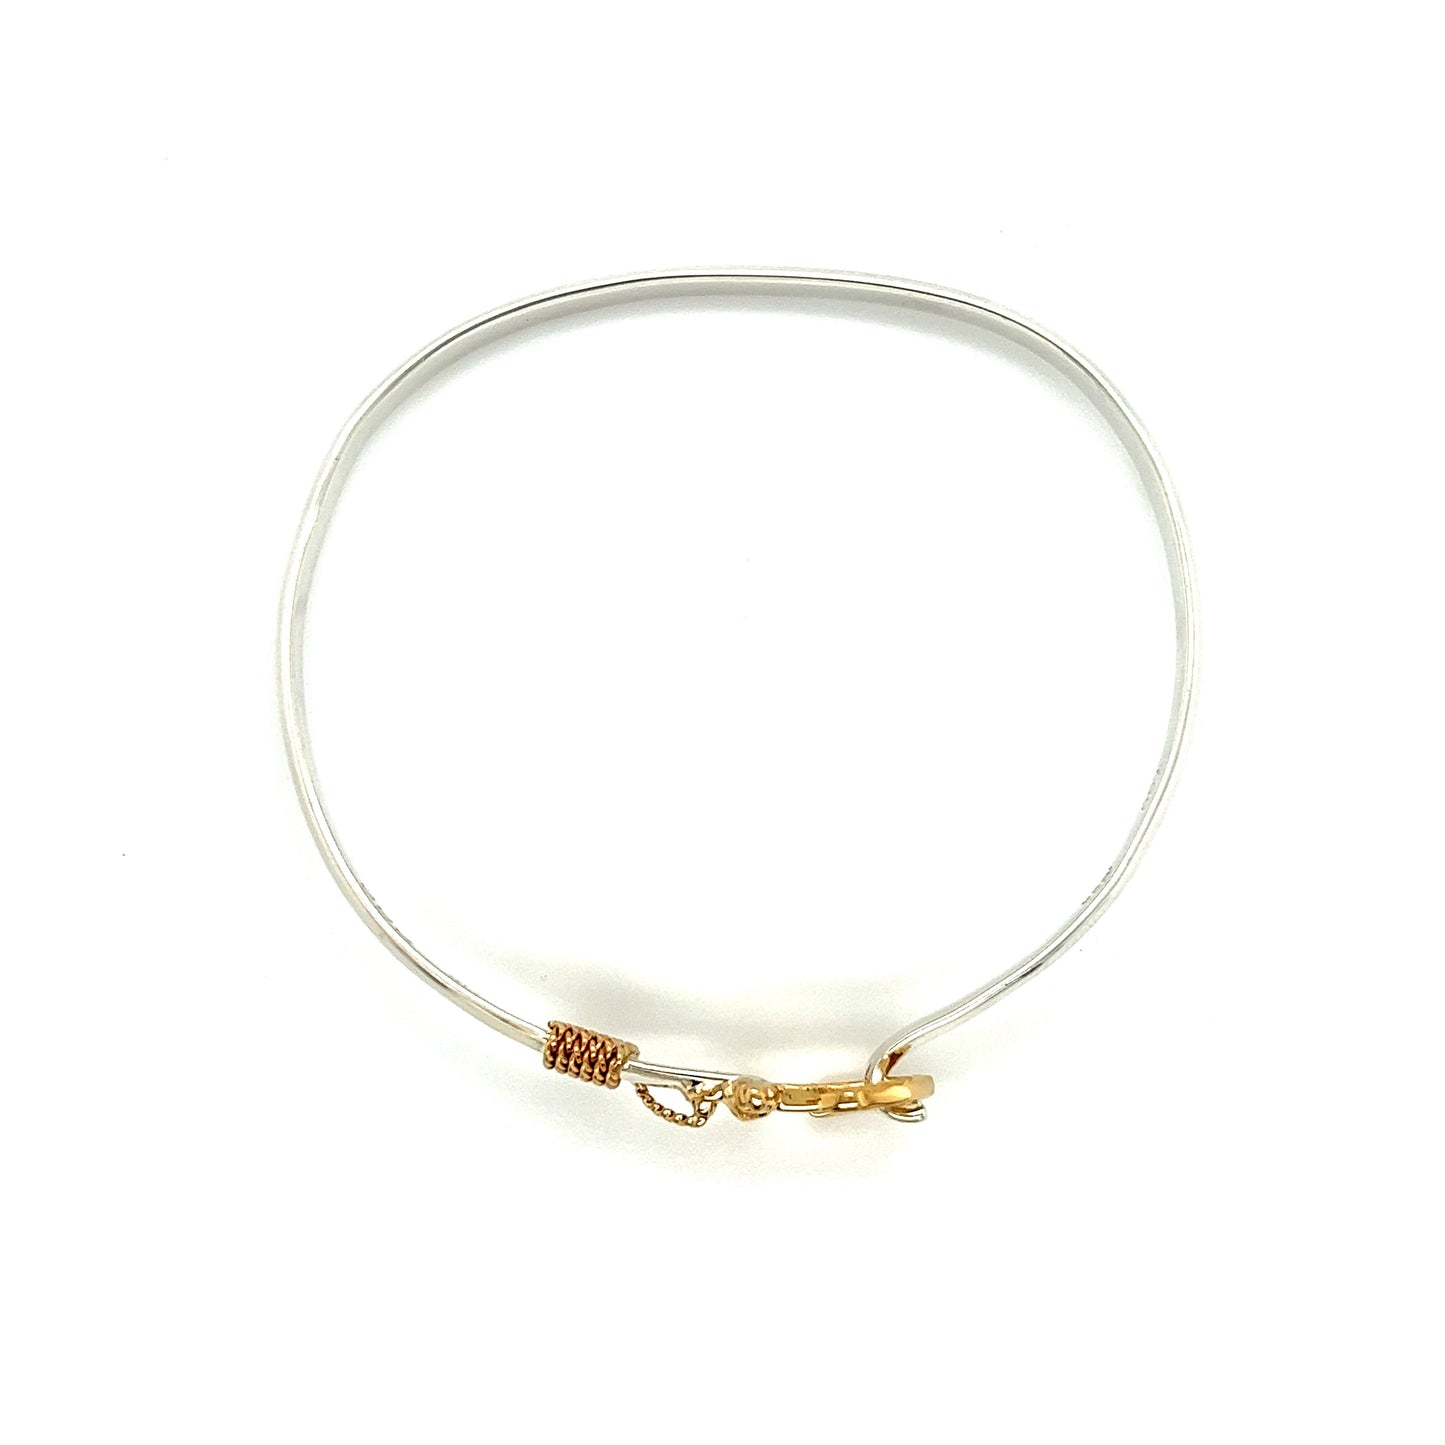 Flat 4mm Bangle Bracelet with 14K Yellow Gold Anchor and Wrap in Sterling Silver Top View